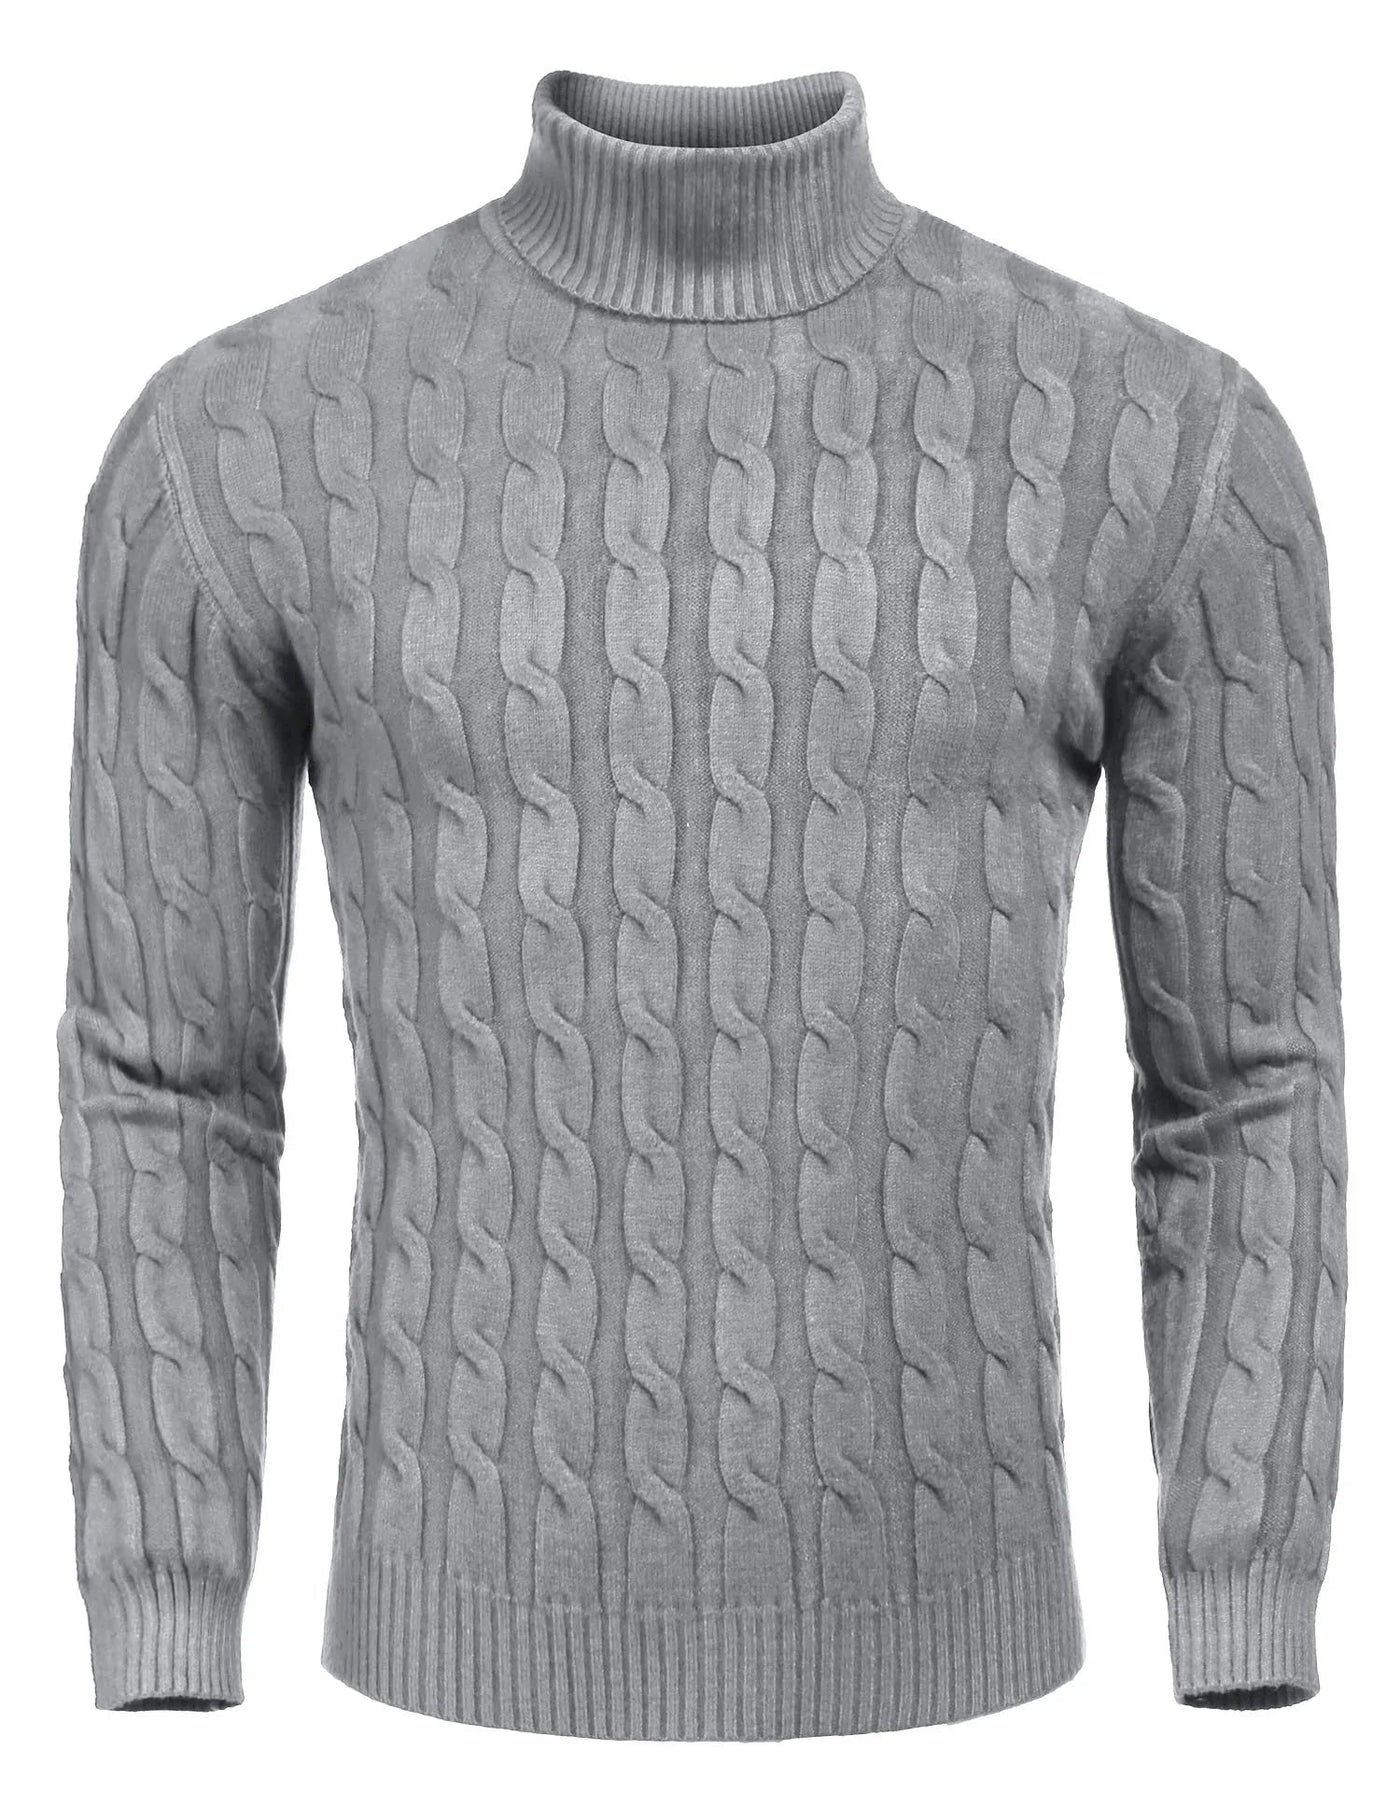 Slim Fit Turtleneck Twisted Knitted Pullover Sweater (US Only) Sweaters COOFANDY Store Grey XS 